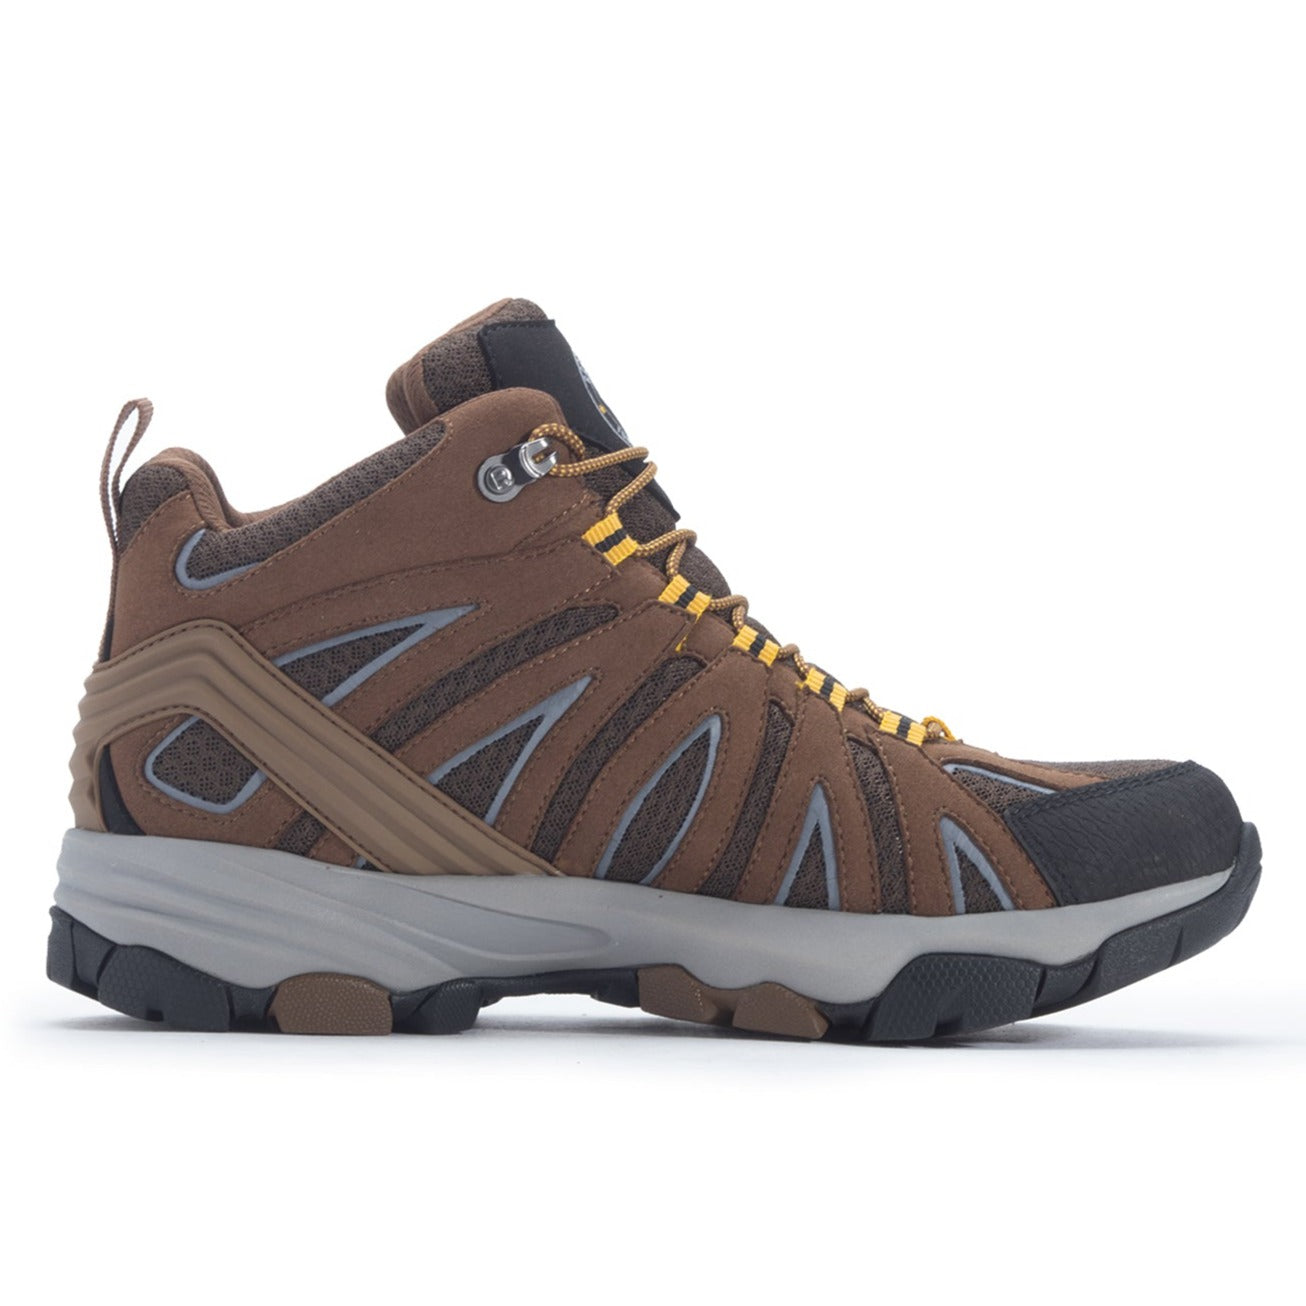 ROCKROOSTER Bedrock Brown 6 Inch Waterproof Hiking Boots with VIBRAM® - Mercantile Mountain